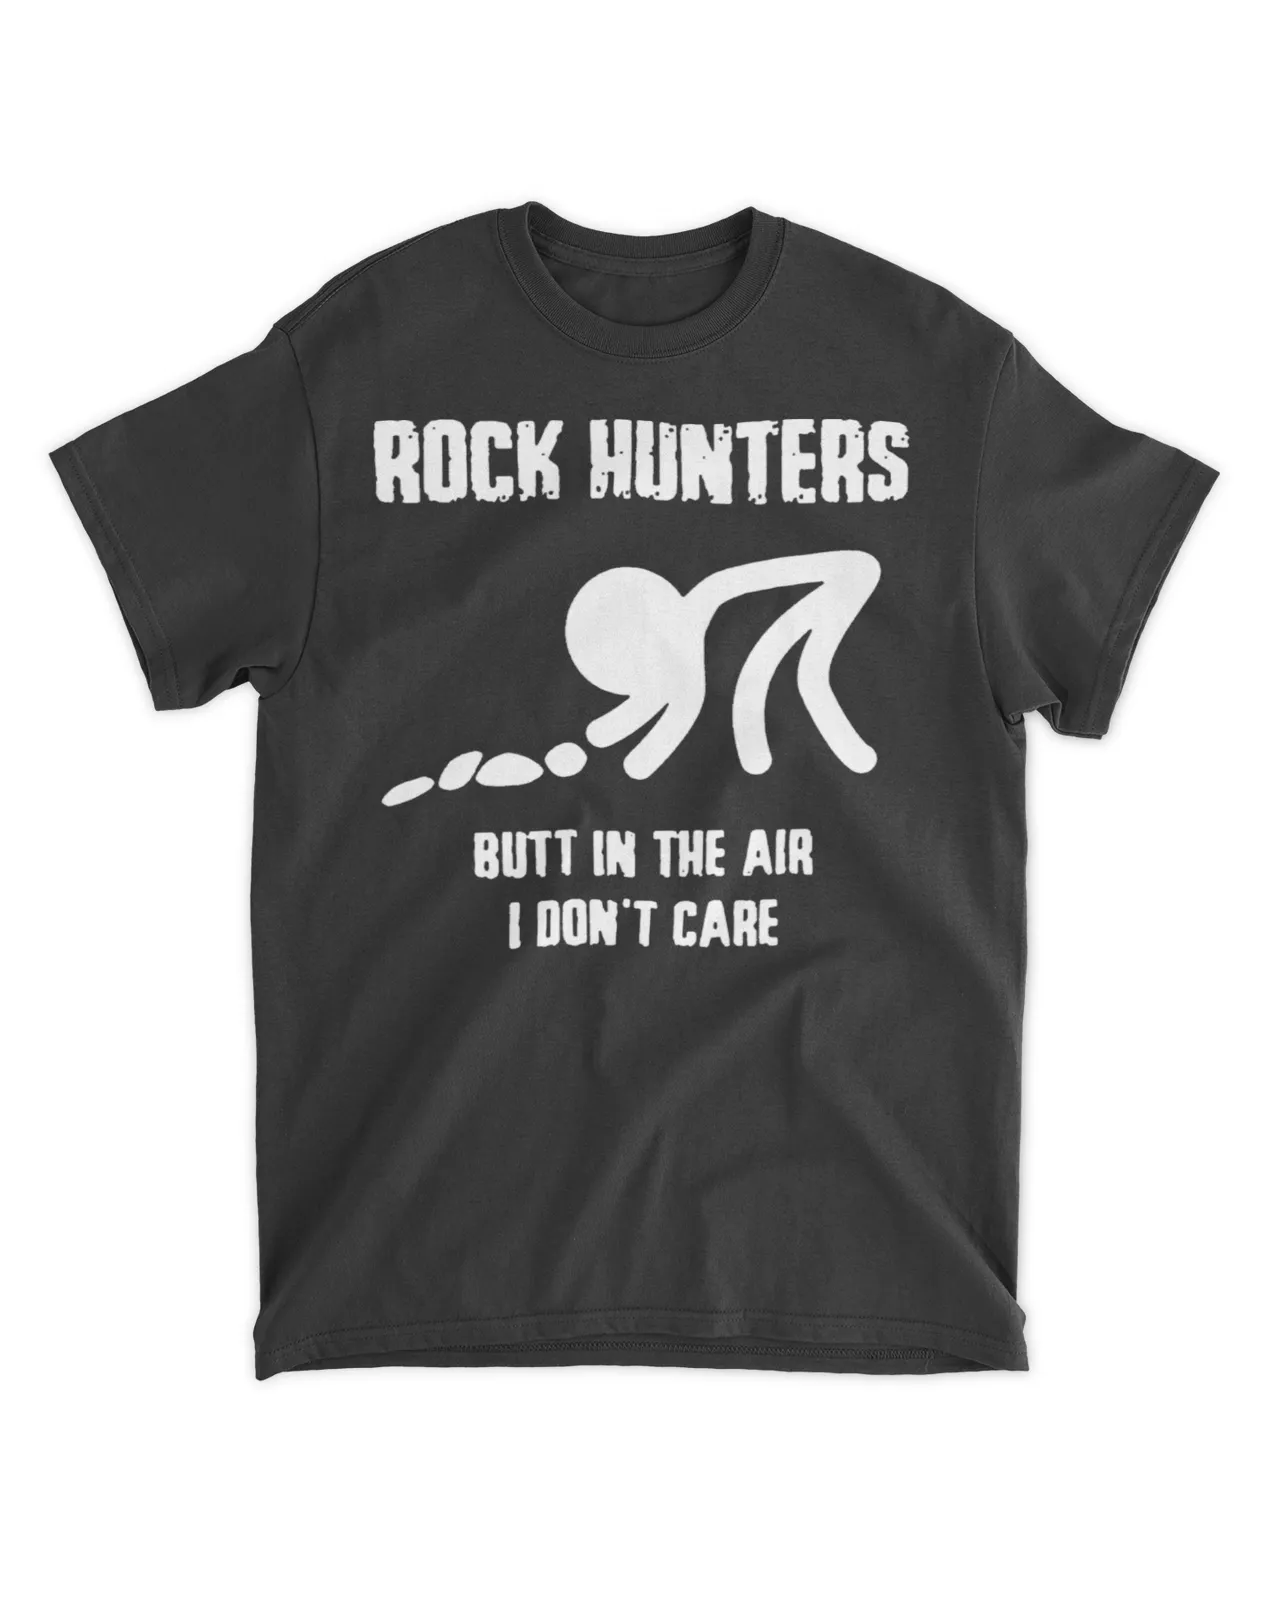  Rock hunters butt in the air I don't care shirt